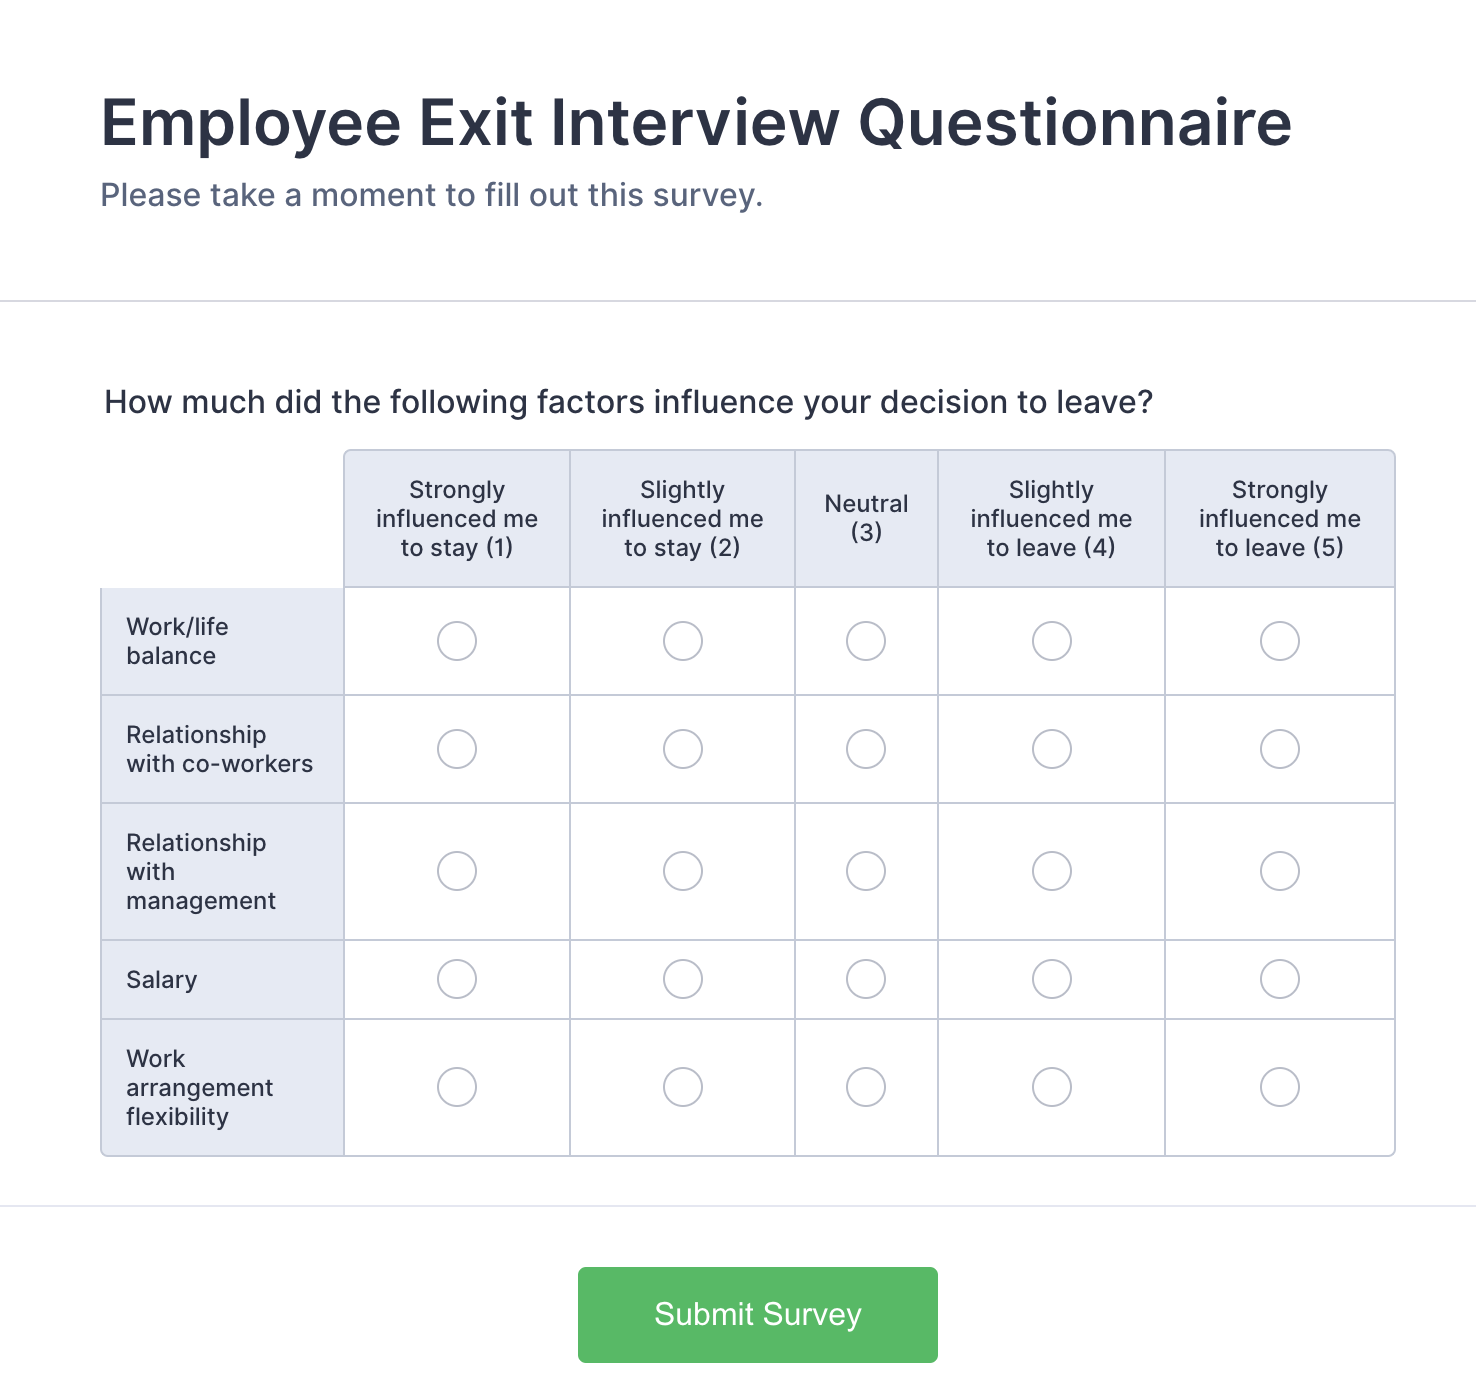 5 Point Likert Scale Analysis, Interpretation And Examples